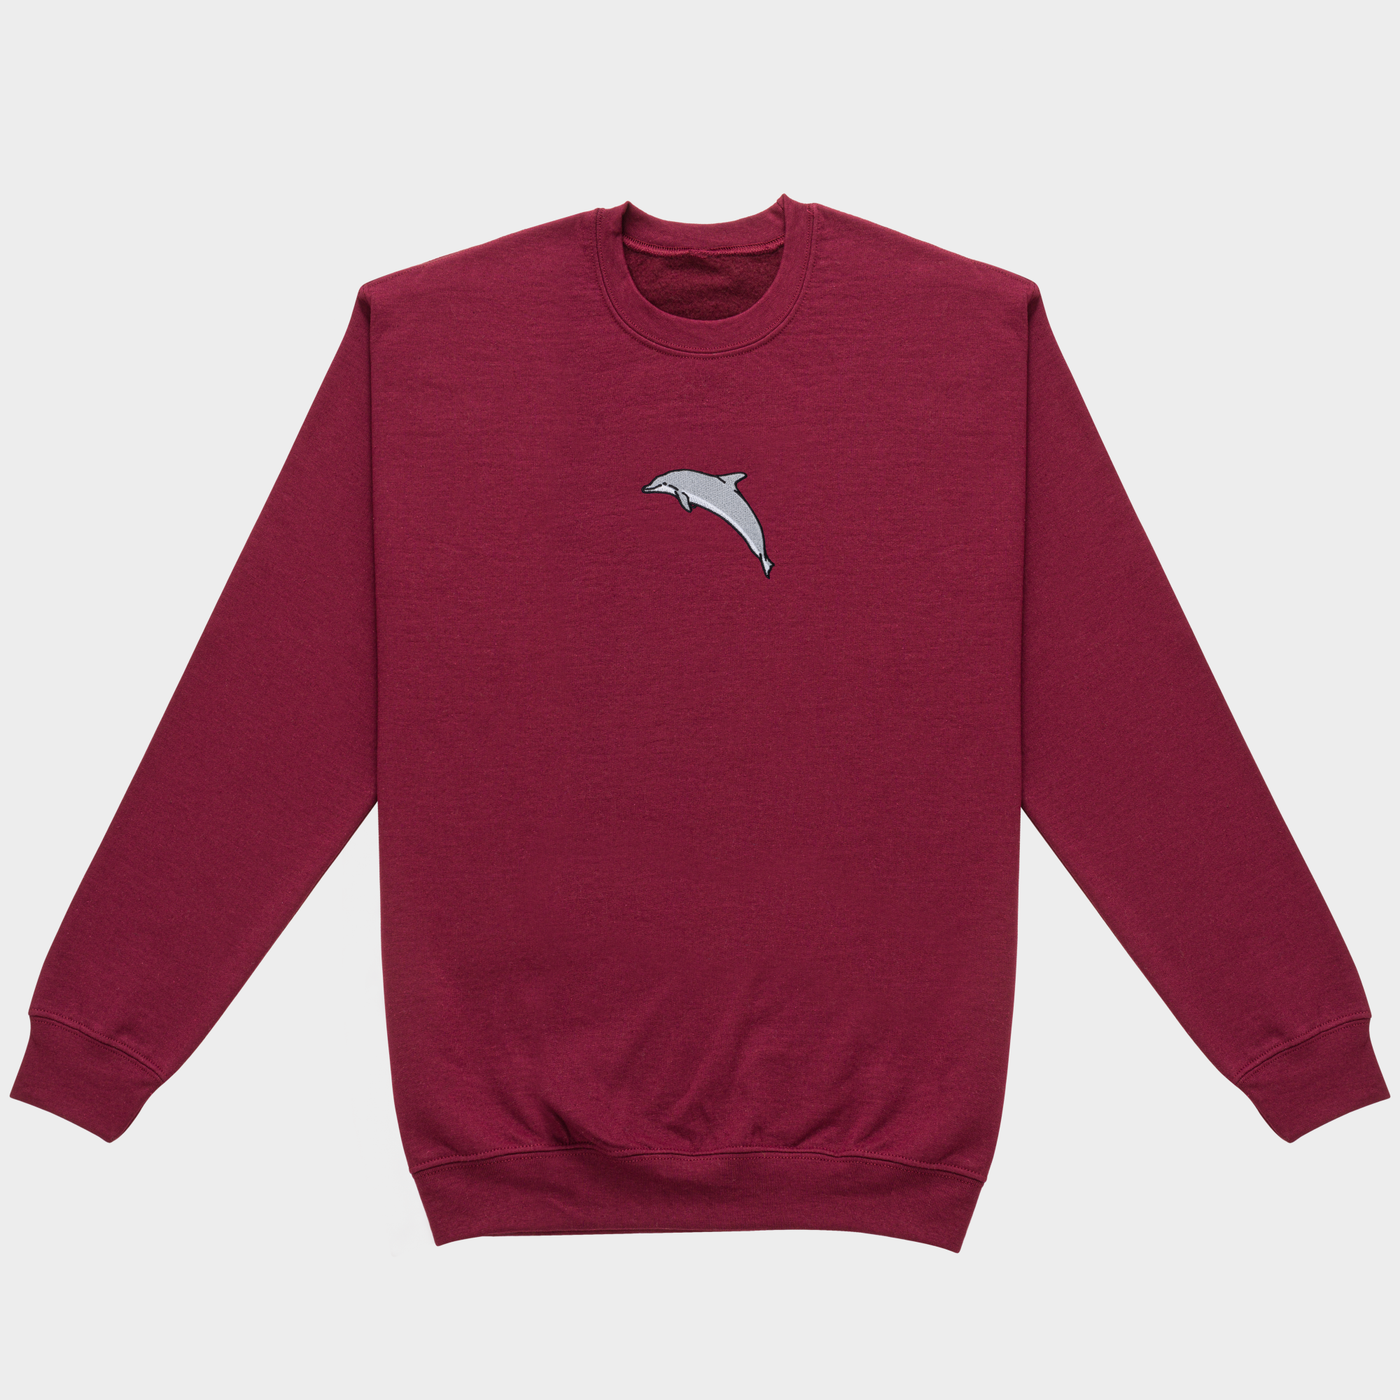 Bobby's Planet Women's Embroidered Dolphin Sweatshirt from Seven Seas Fish Animals Collection in Maroon Color#color_maroon